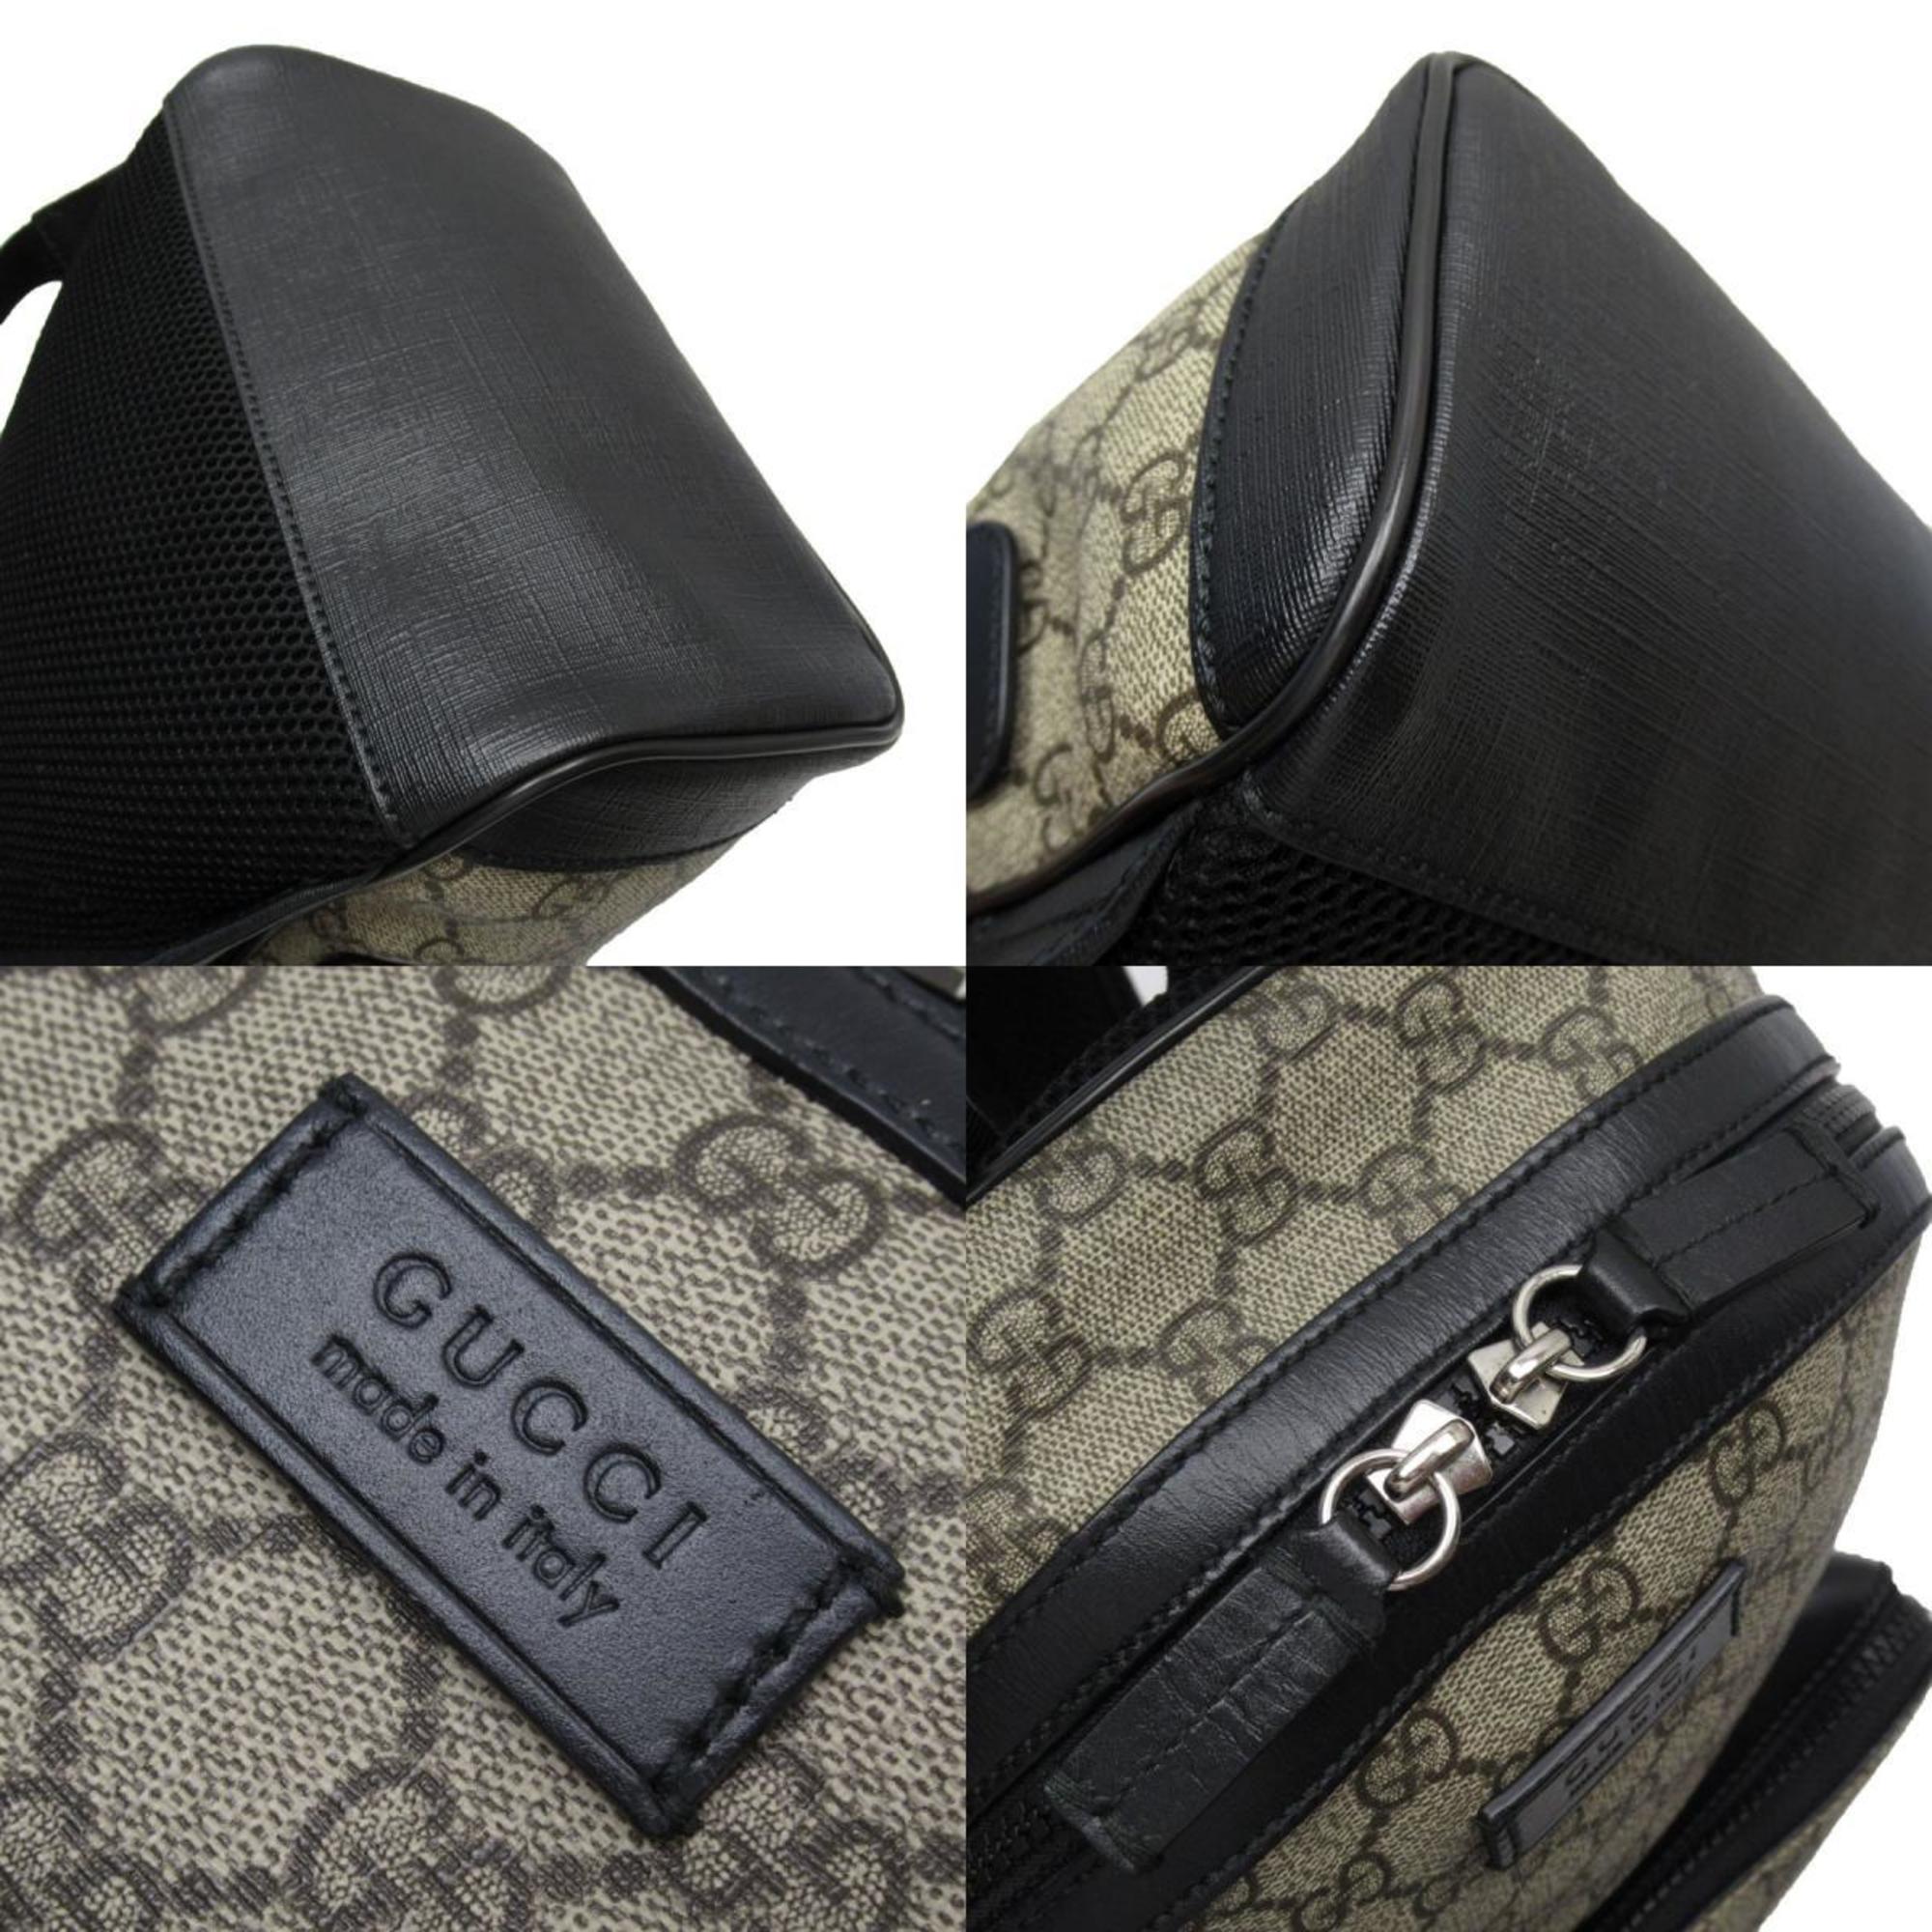 GUCCI Backpack GG Supreme Leather Canvas Beige Brown Black Women's 429020 w0324g